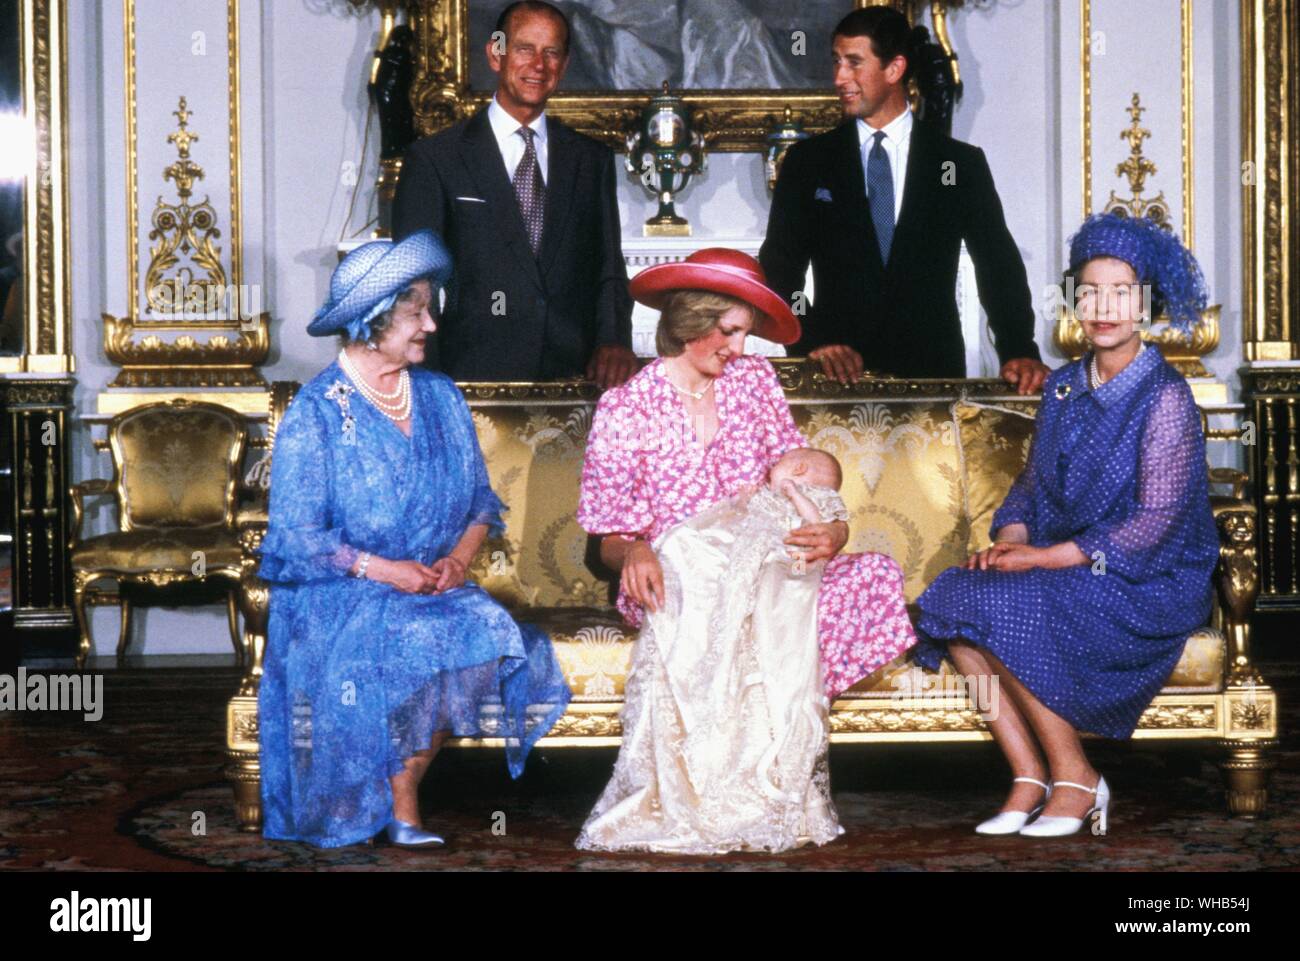 Christening of first son, William, of Prince Charles and Diana, Princess of Wales (Lady Diana Spencer) 4 August 1982 at Buckingham Palace. Diana is flanked by Queen Elizabeth the Queen Mother (grandmother to Prince Charles and mother to Queen Elizabeth II) and Queen Elizabeth II (mother of Prince Charles and mother-in-law to Diana). In the photo behind are PrincePhilip the Duke of Edinburgh, and Prince Charles, the Prince of Wales.. Stock Photo